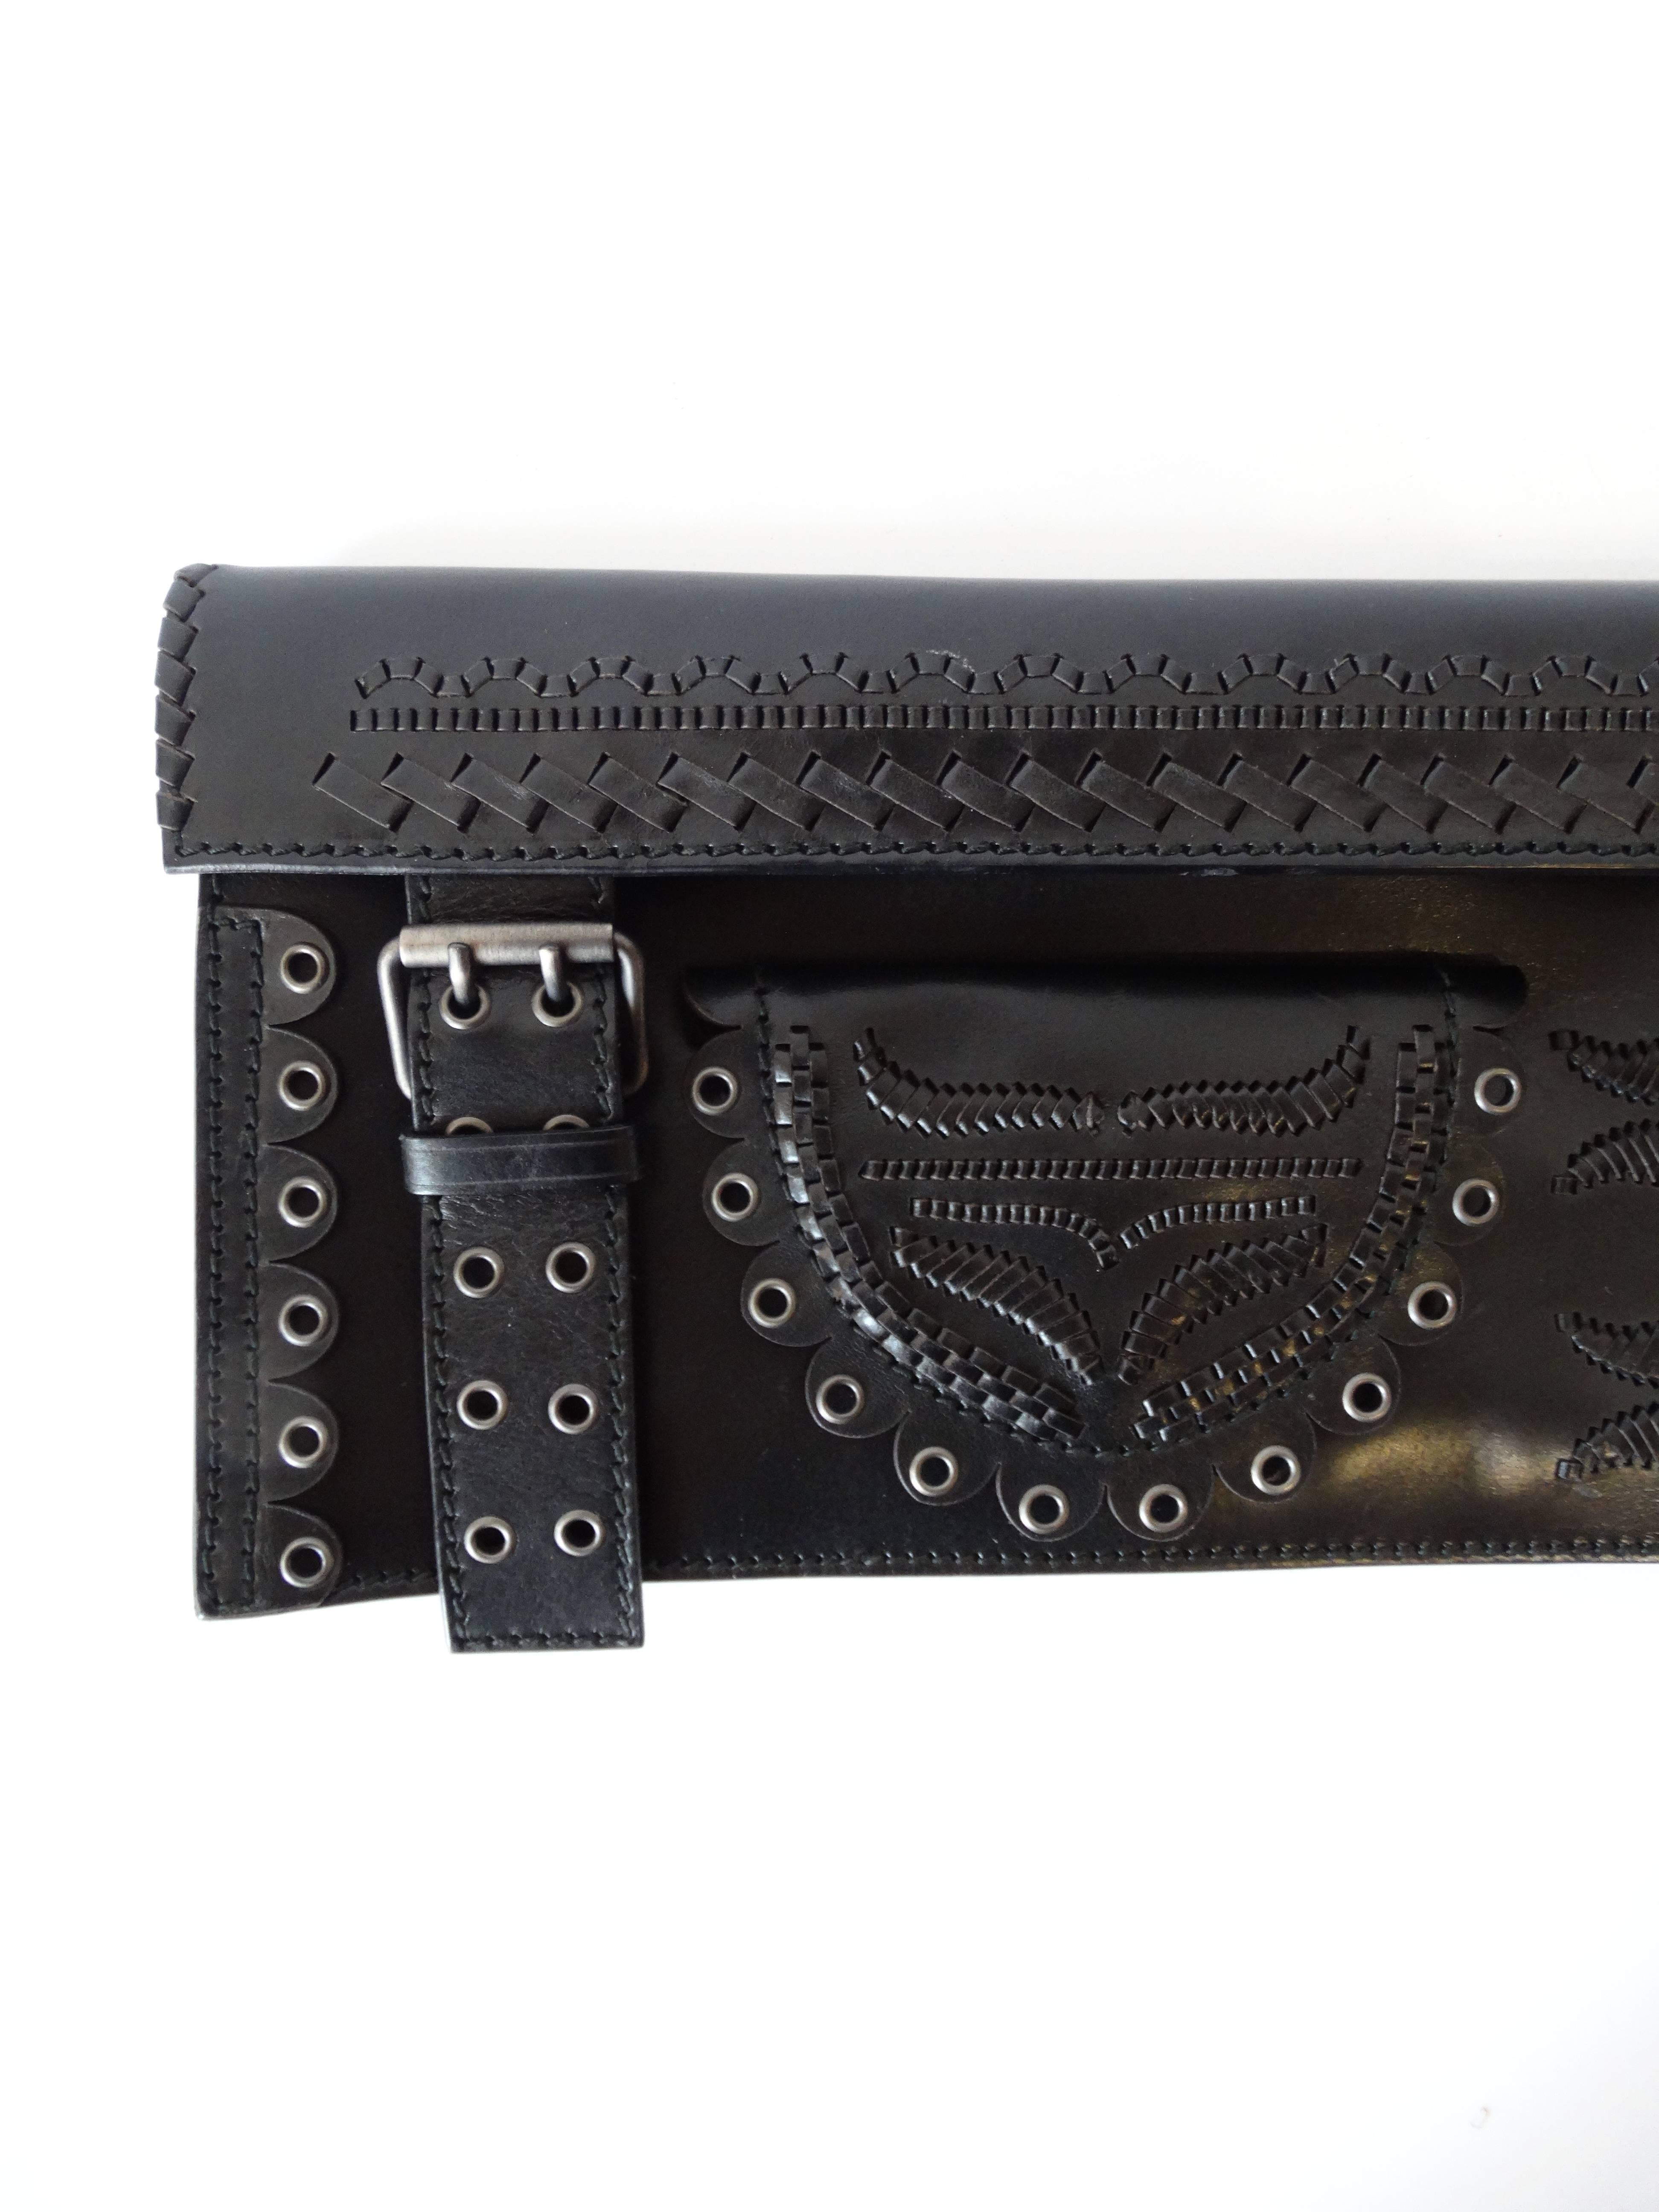 Score yourself some incredible Tom Ford for Yves Saint Laurent with our clutch from the Fall/Winter 2001 collection! Long rectangular black leather clutch with silver grommet details. Braided, woven and cut outs throughout the leather. Unique